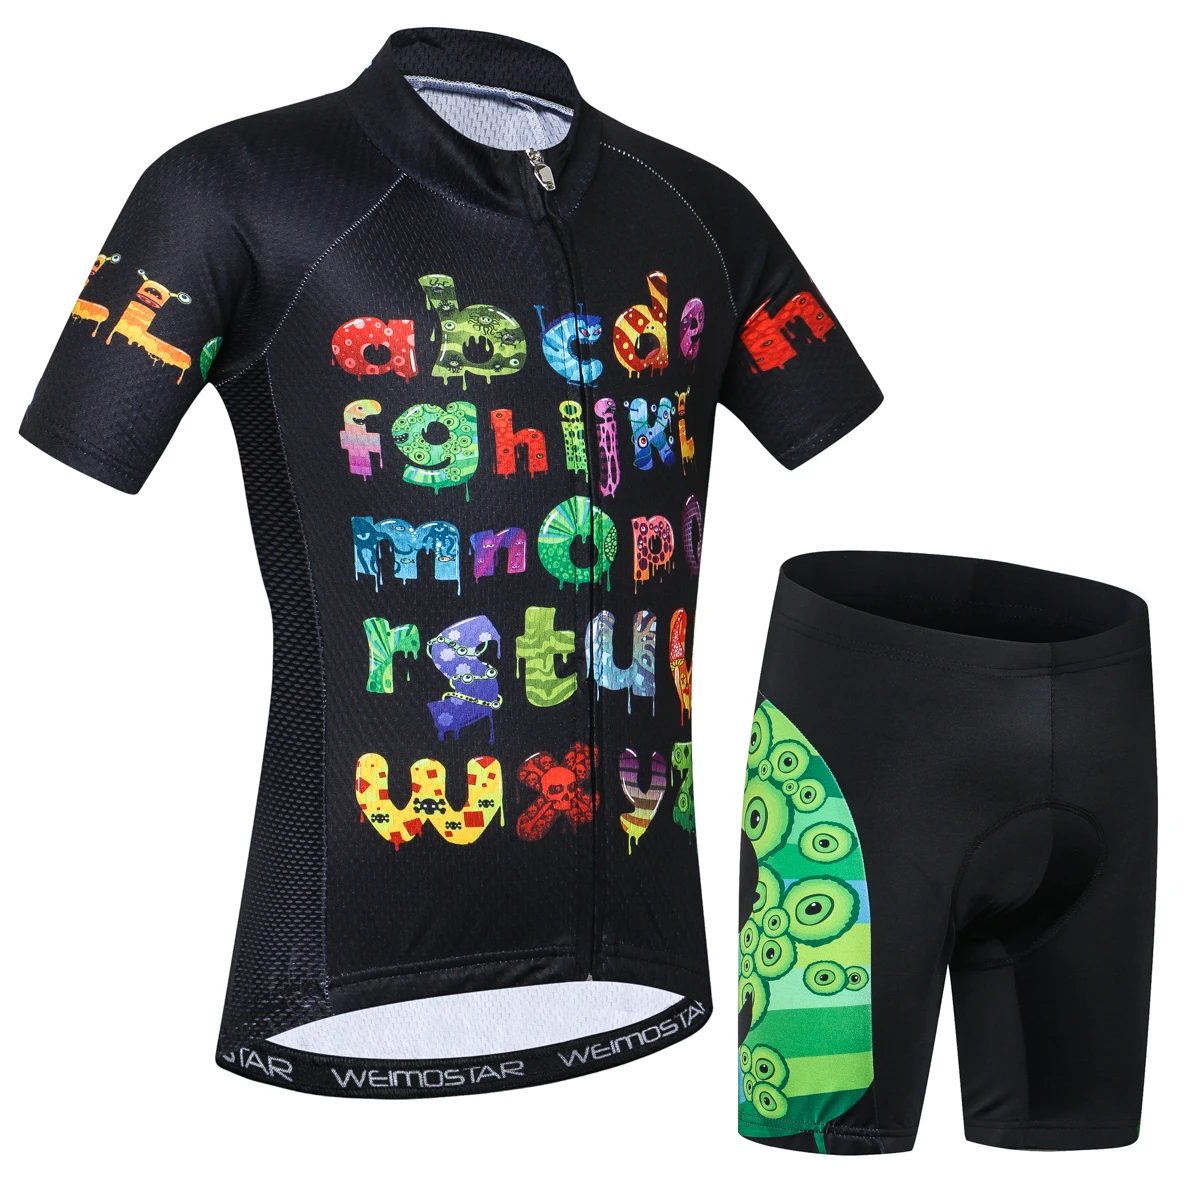 Kids Cycling Jersey Set Cartoon Short Sleeve Bike Top for Boy Girl with Padded Shorts Funny Alphabet Size M